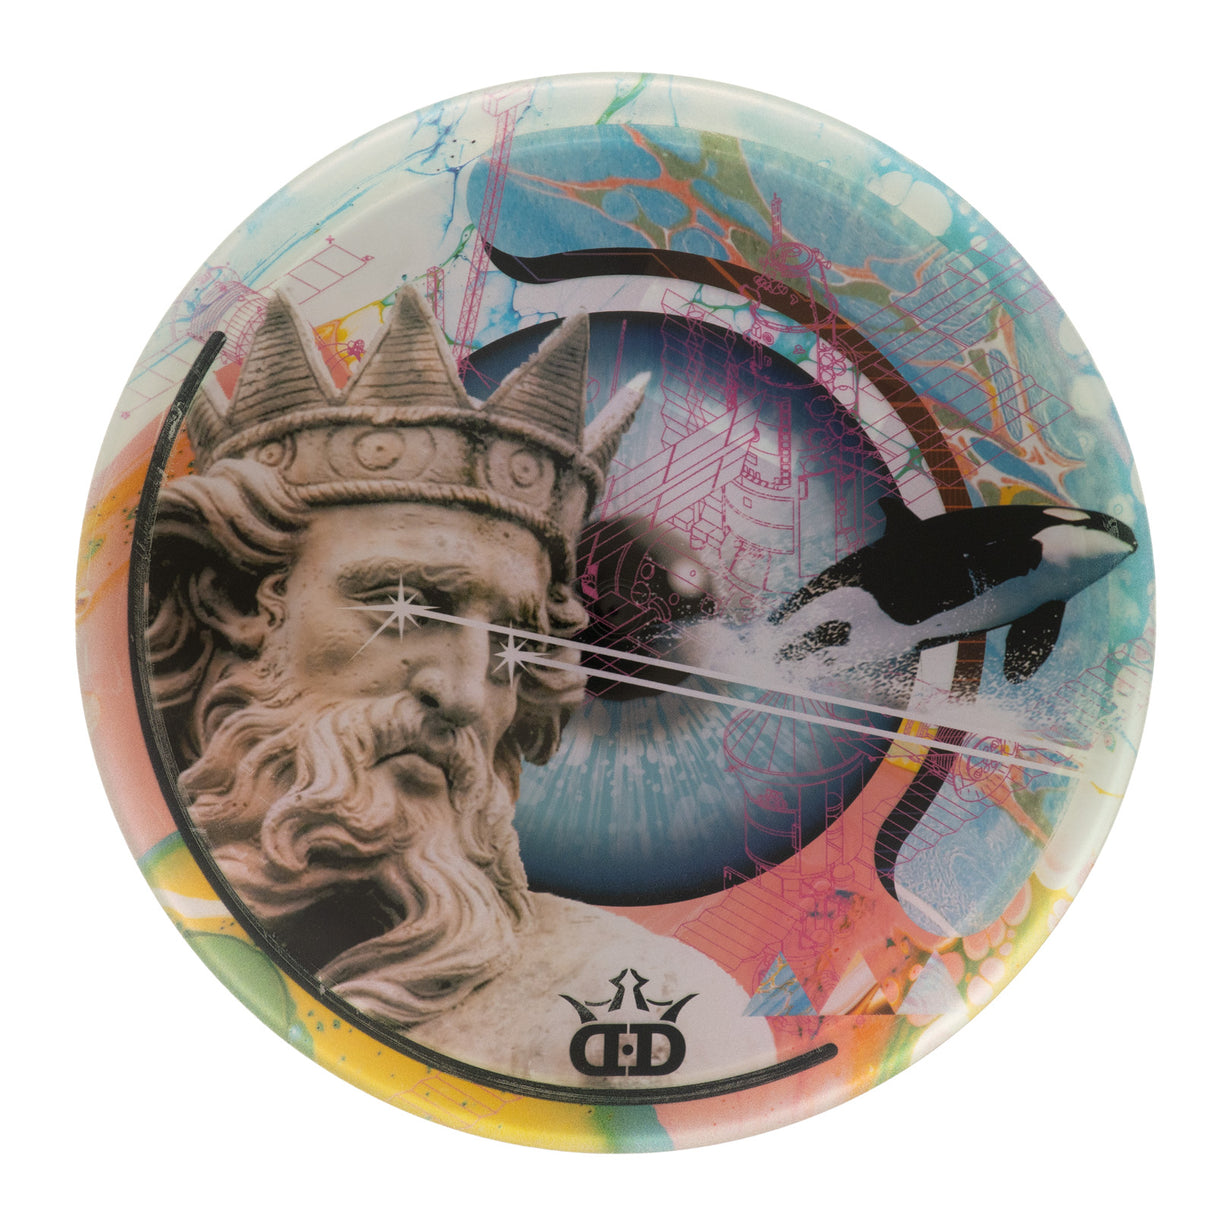 Dynamic Discs EMAC Truth - Glimmer Ice Dreamscape Dyemax 178g | Style 0001